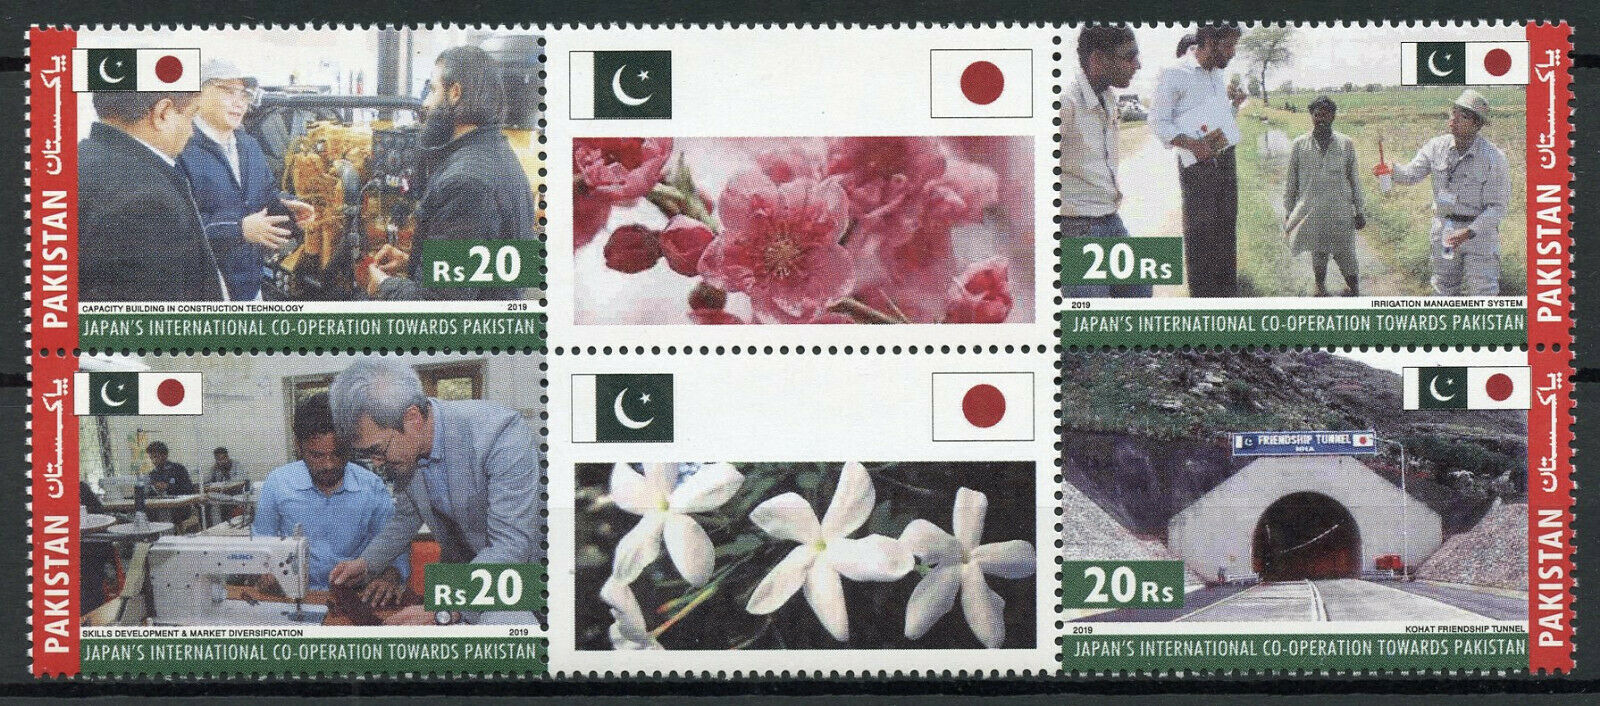 Pakistan Flowers Stamps 2019 MNH Cooperation with Japan Flags 4v Block